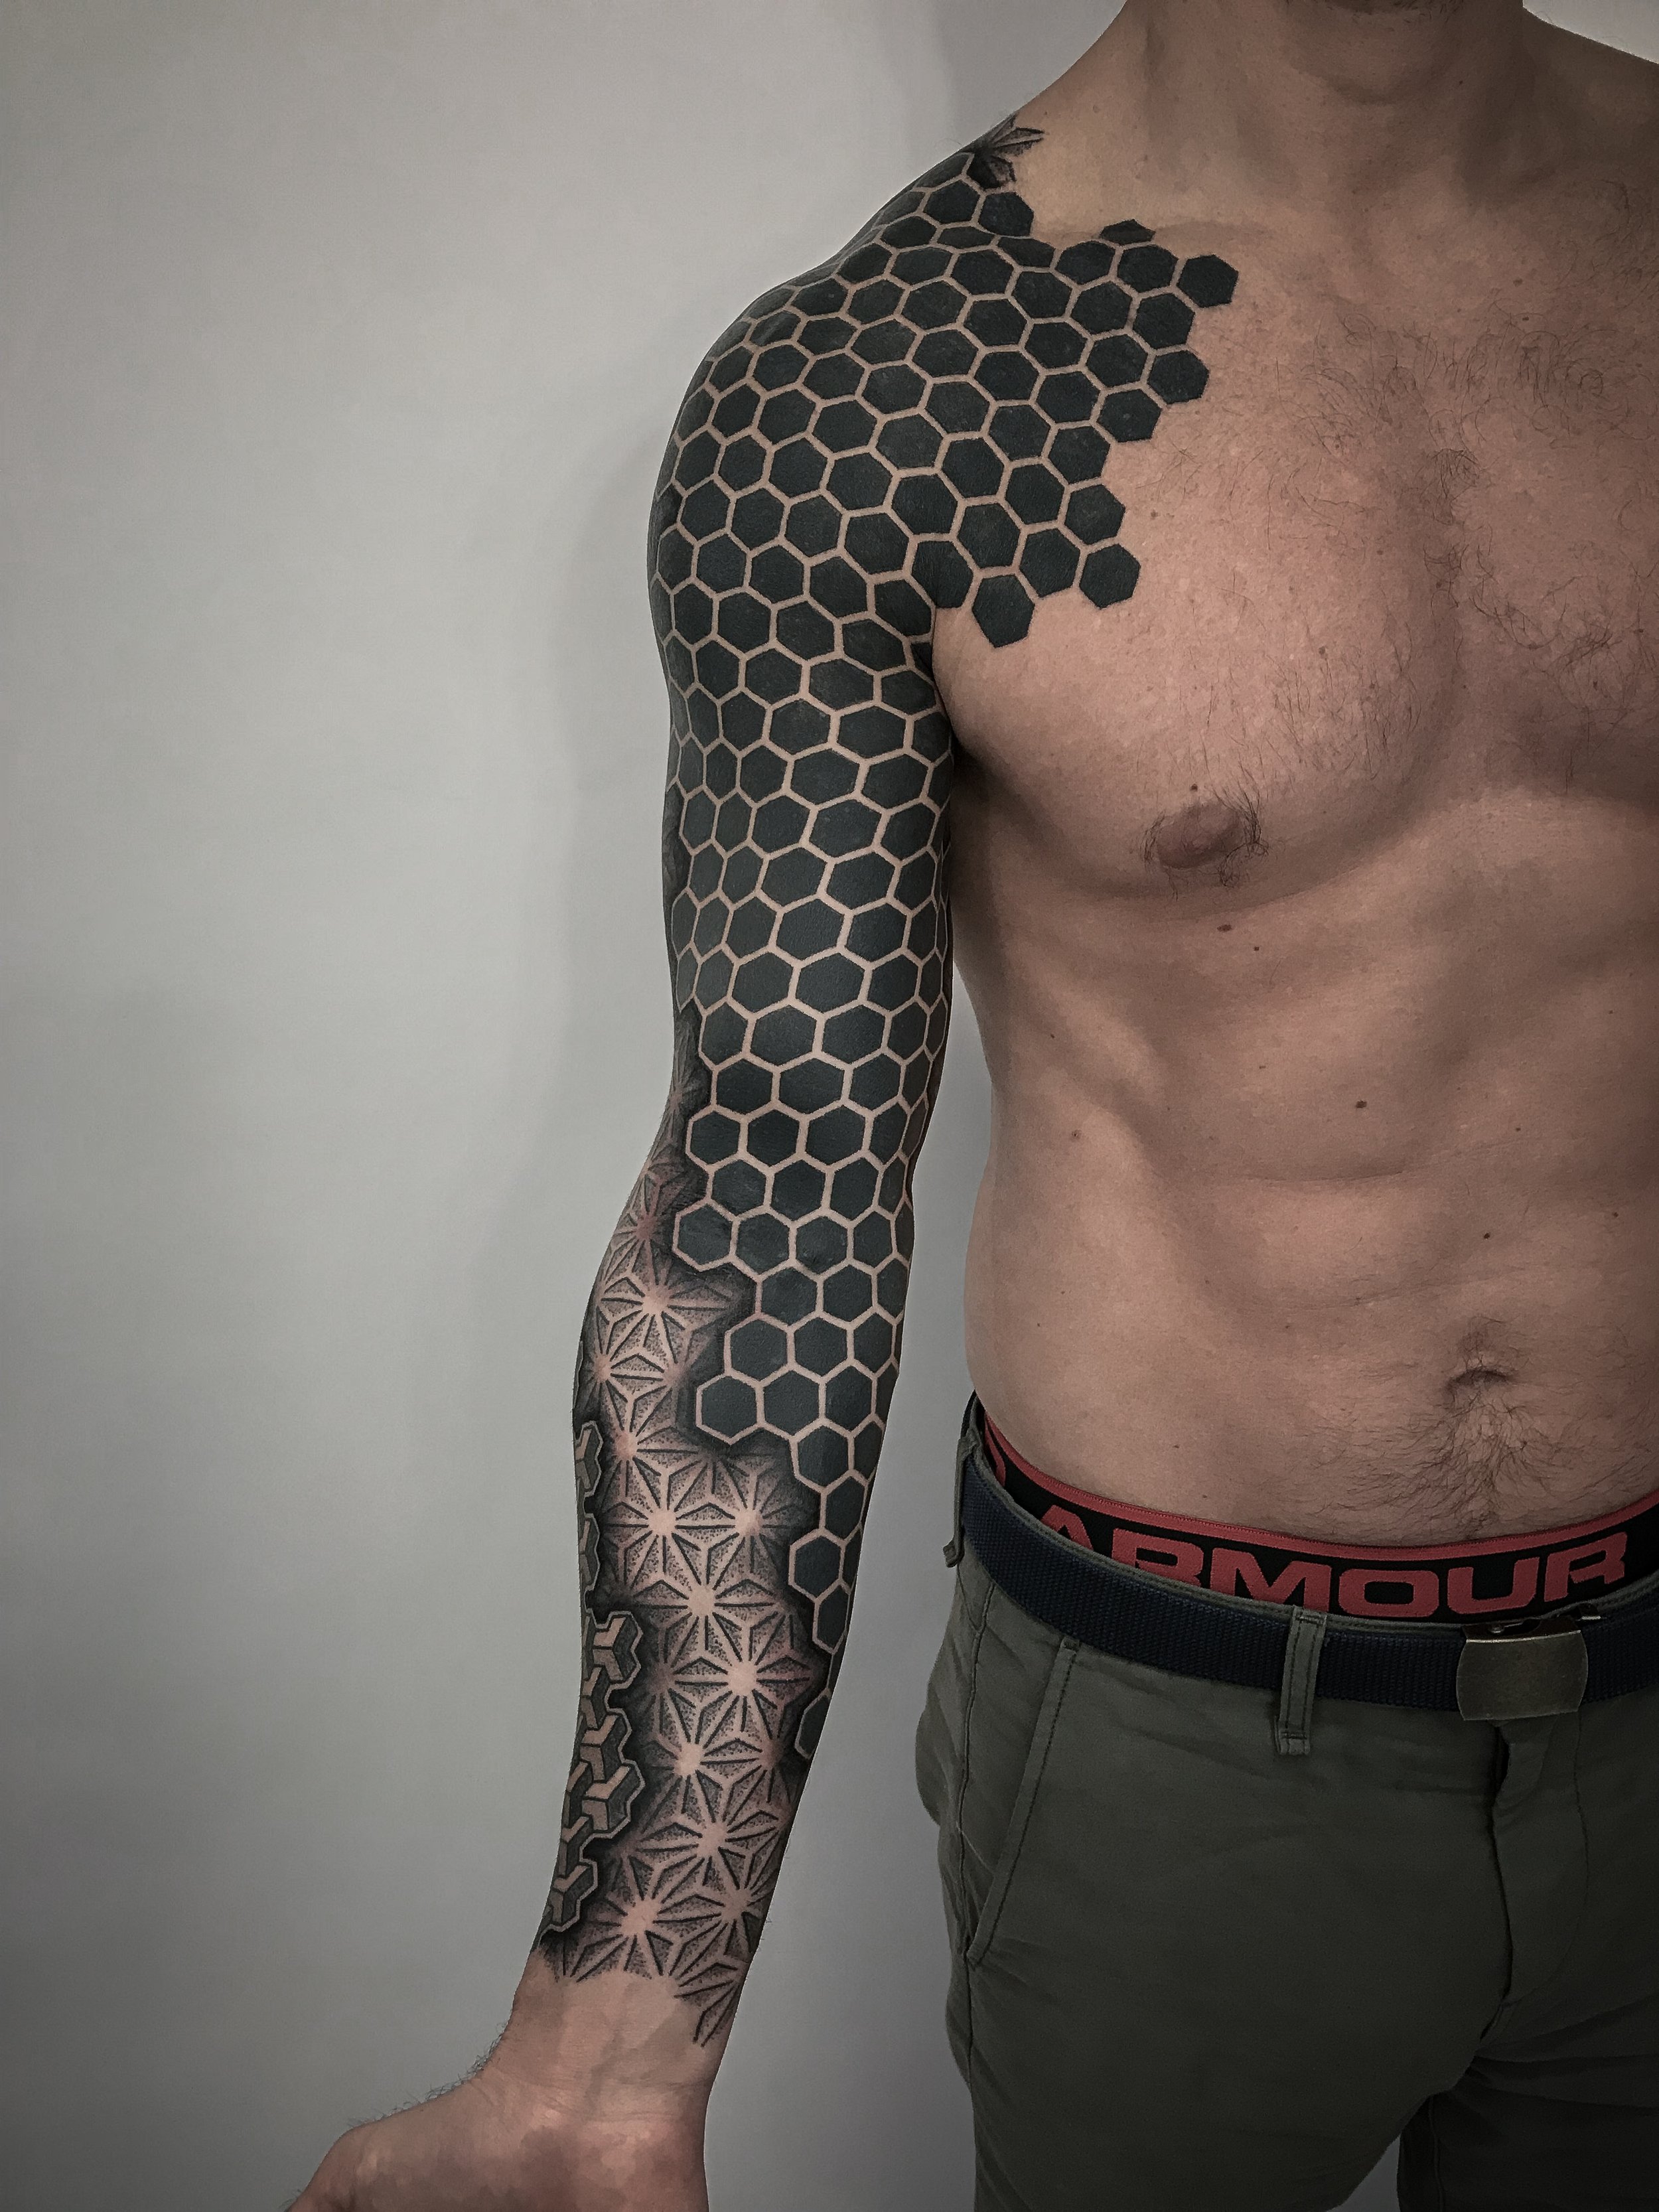 Just finished up this dope ass geometric tattoo #halfsleevetattoo #geometric  #geometrictattoo #homeycombtattoo #tattooideas #mandala #man... | Instagram